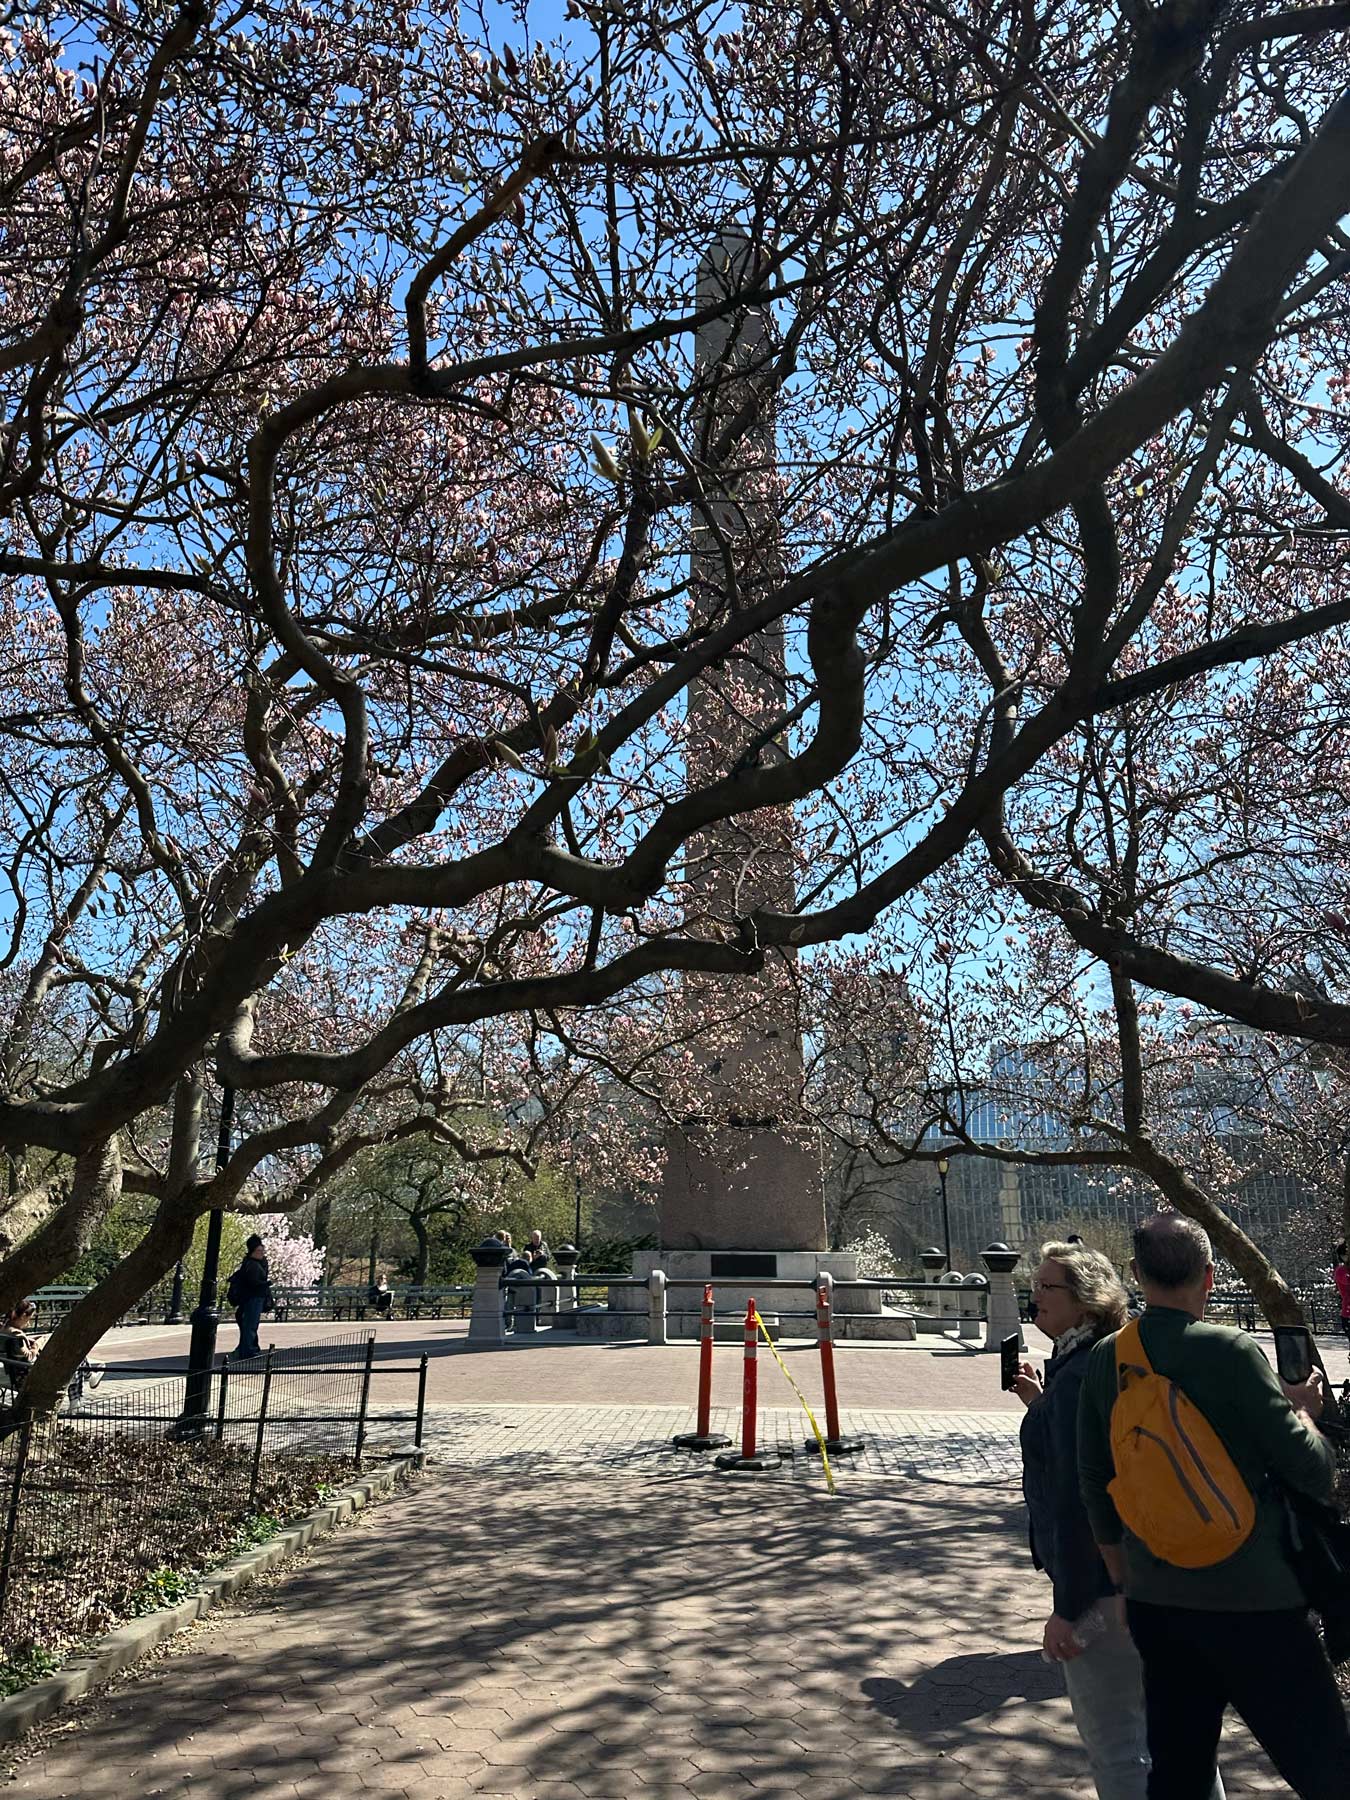 nyc cherry blossoms tracker